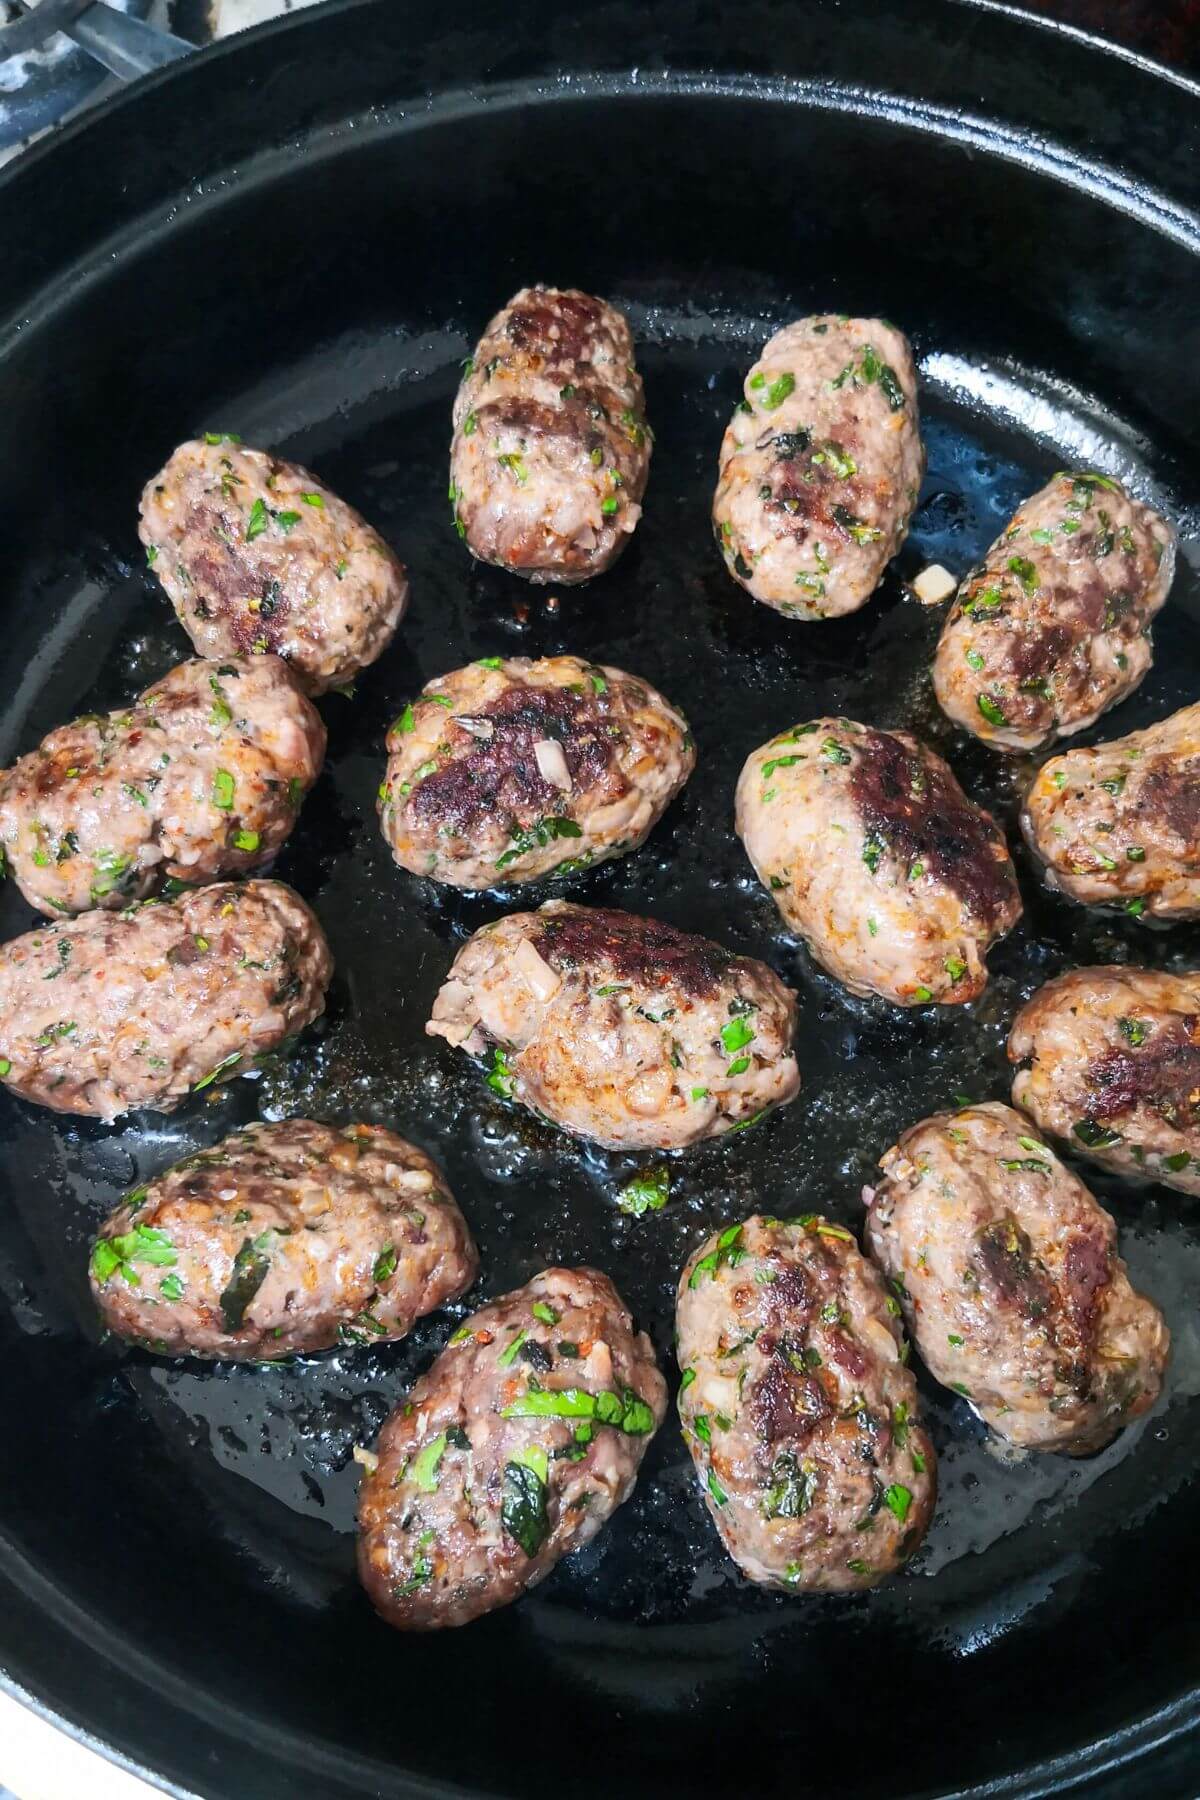 Browned lamb kofta cooking in a black skillet on the stove top.